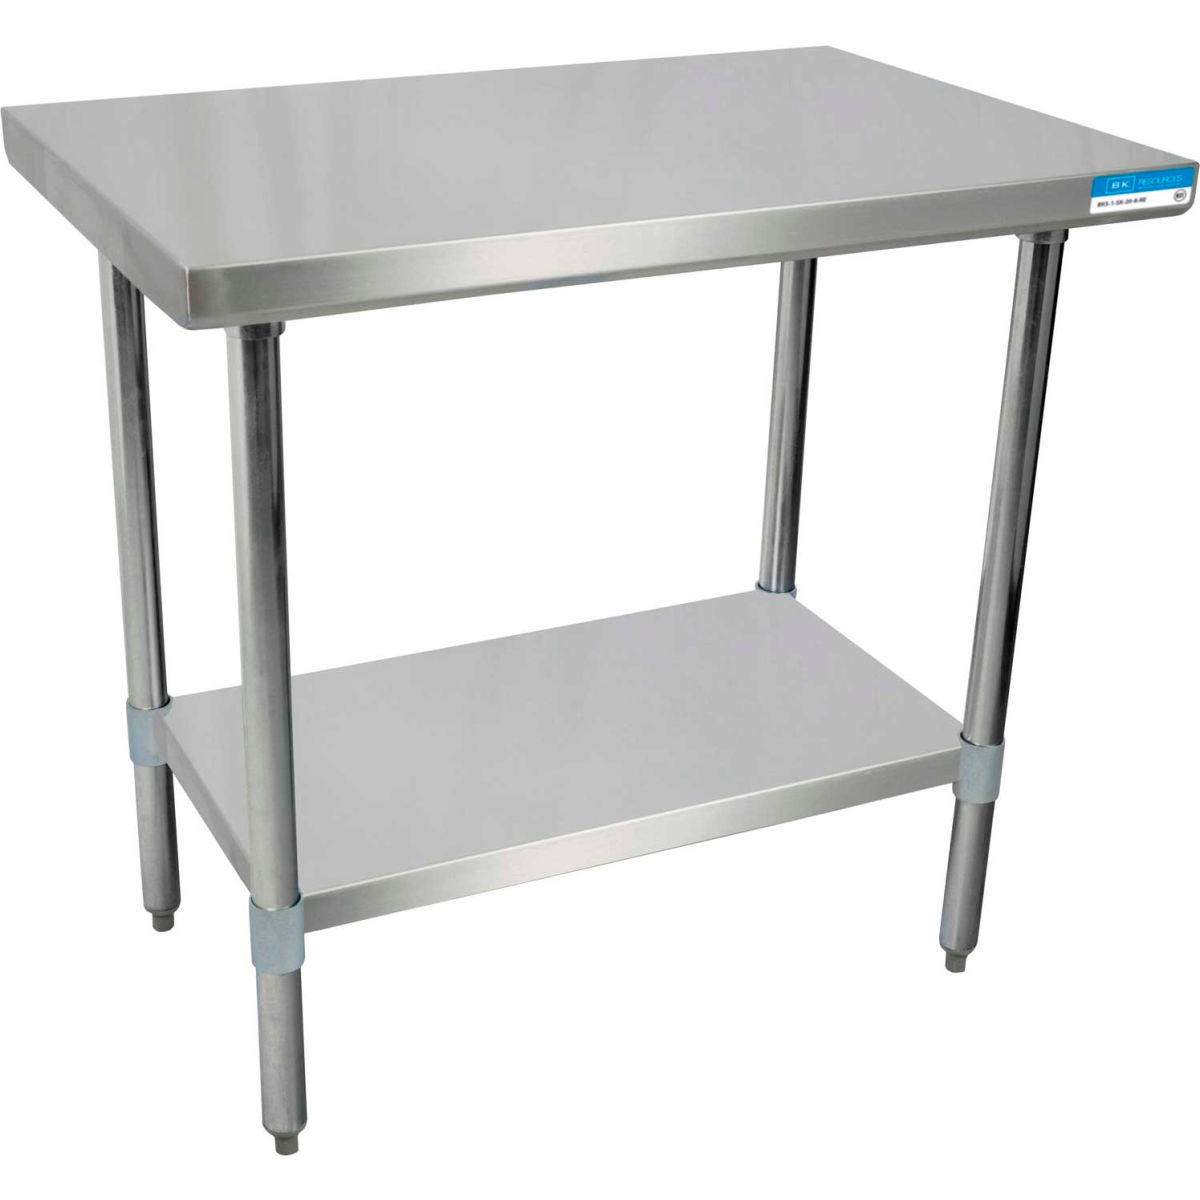 Picture of BK Resources B1516237 18 Gauge 430 Series Stainless Workbench with Undershelf - 72 x 18 in.